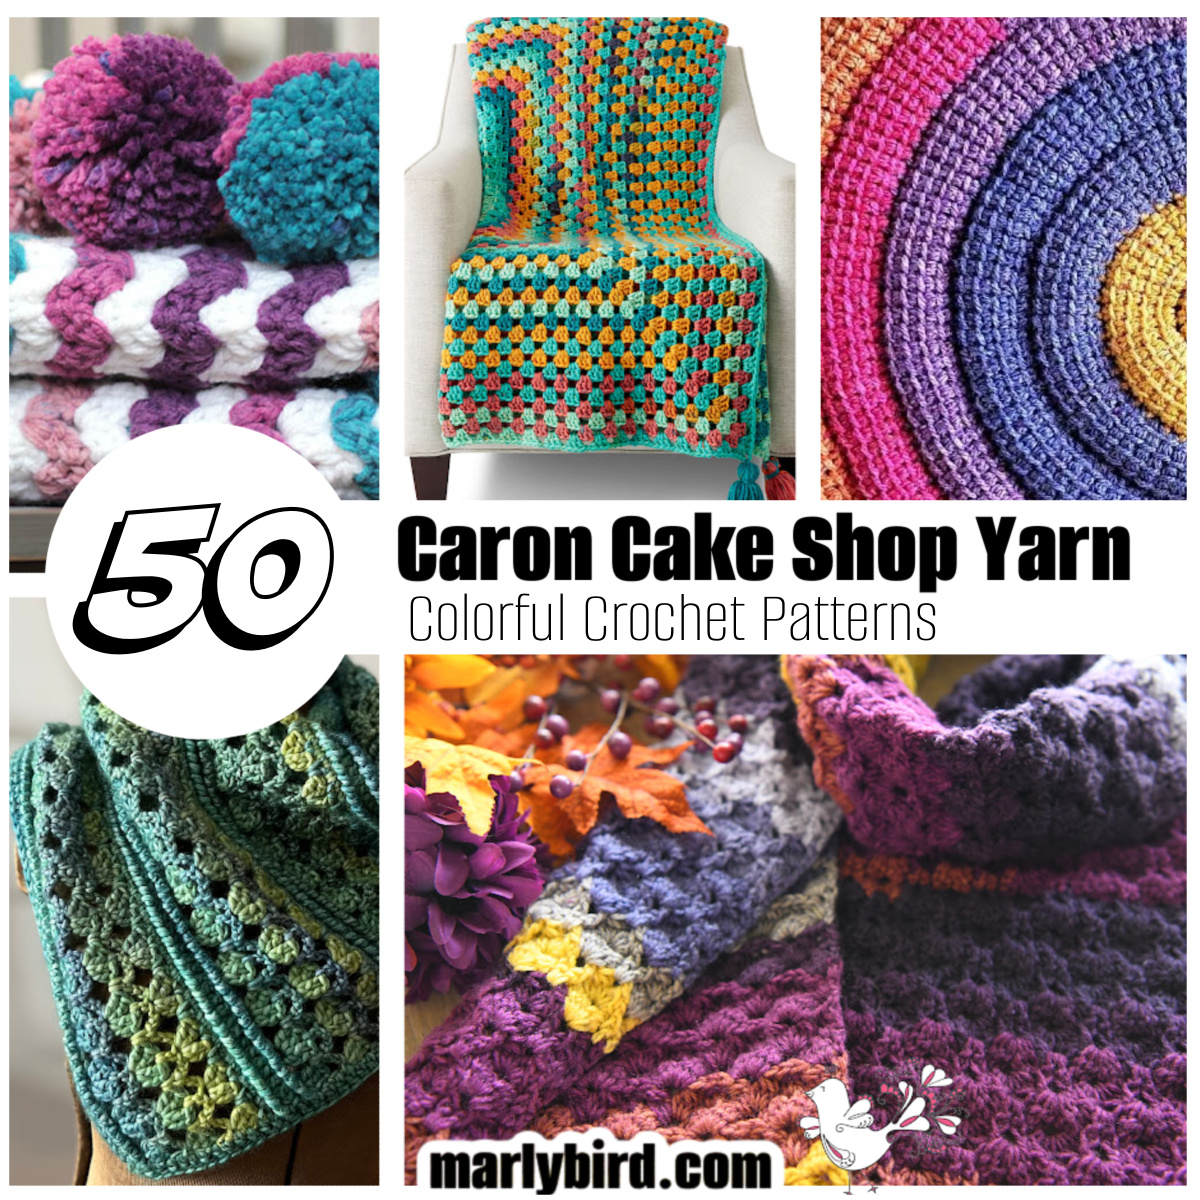 Lets Talk NEW YARN AGAIN / New Colors Caron Anniversary Cakes 